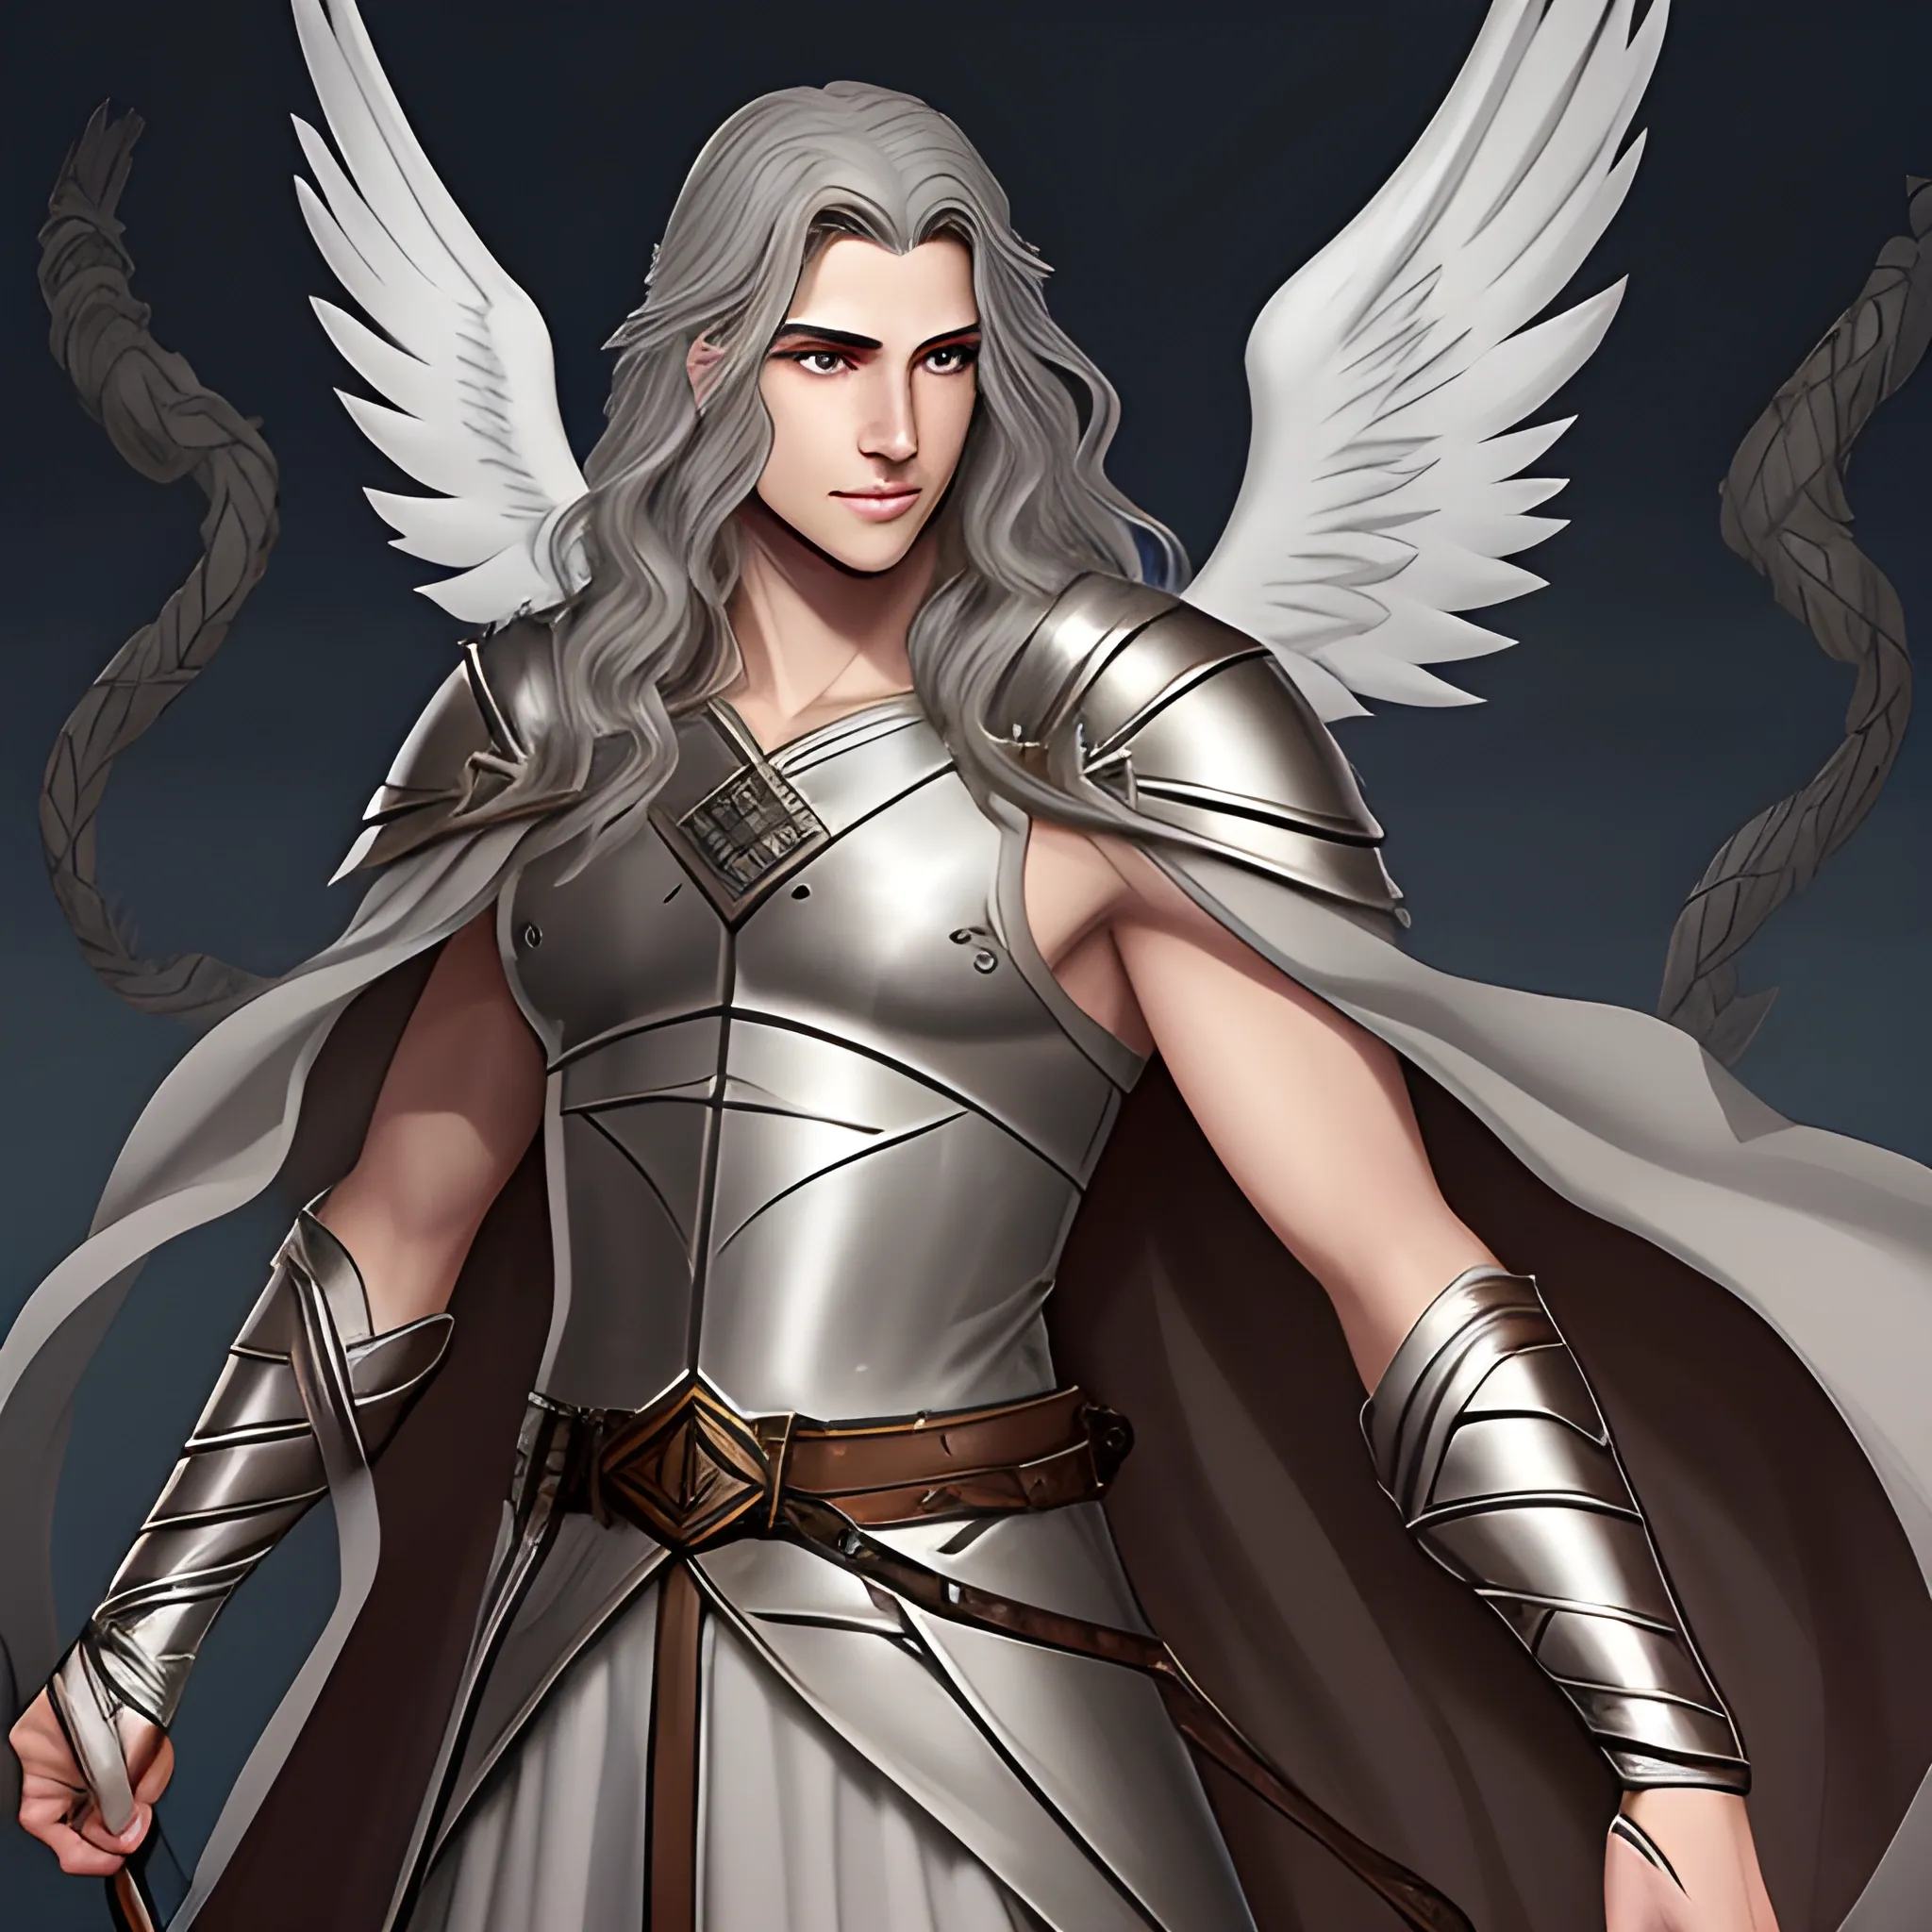 male aasimar from dungeons & dragons with: brown, semi-wavy and semi-long hair; very light gray and slightly shiny skin; grey eyes; 